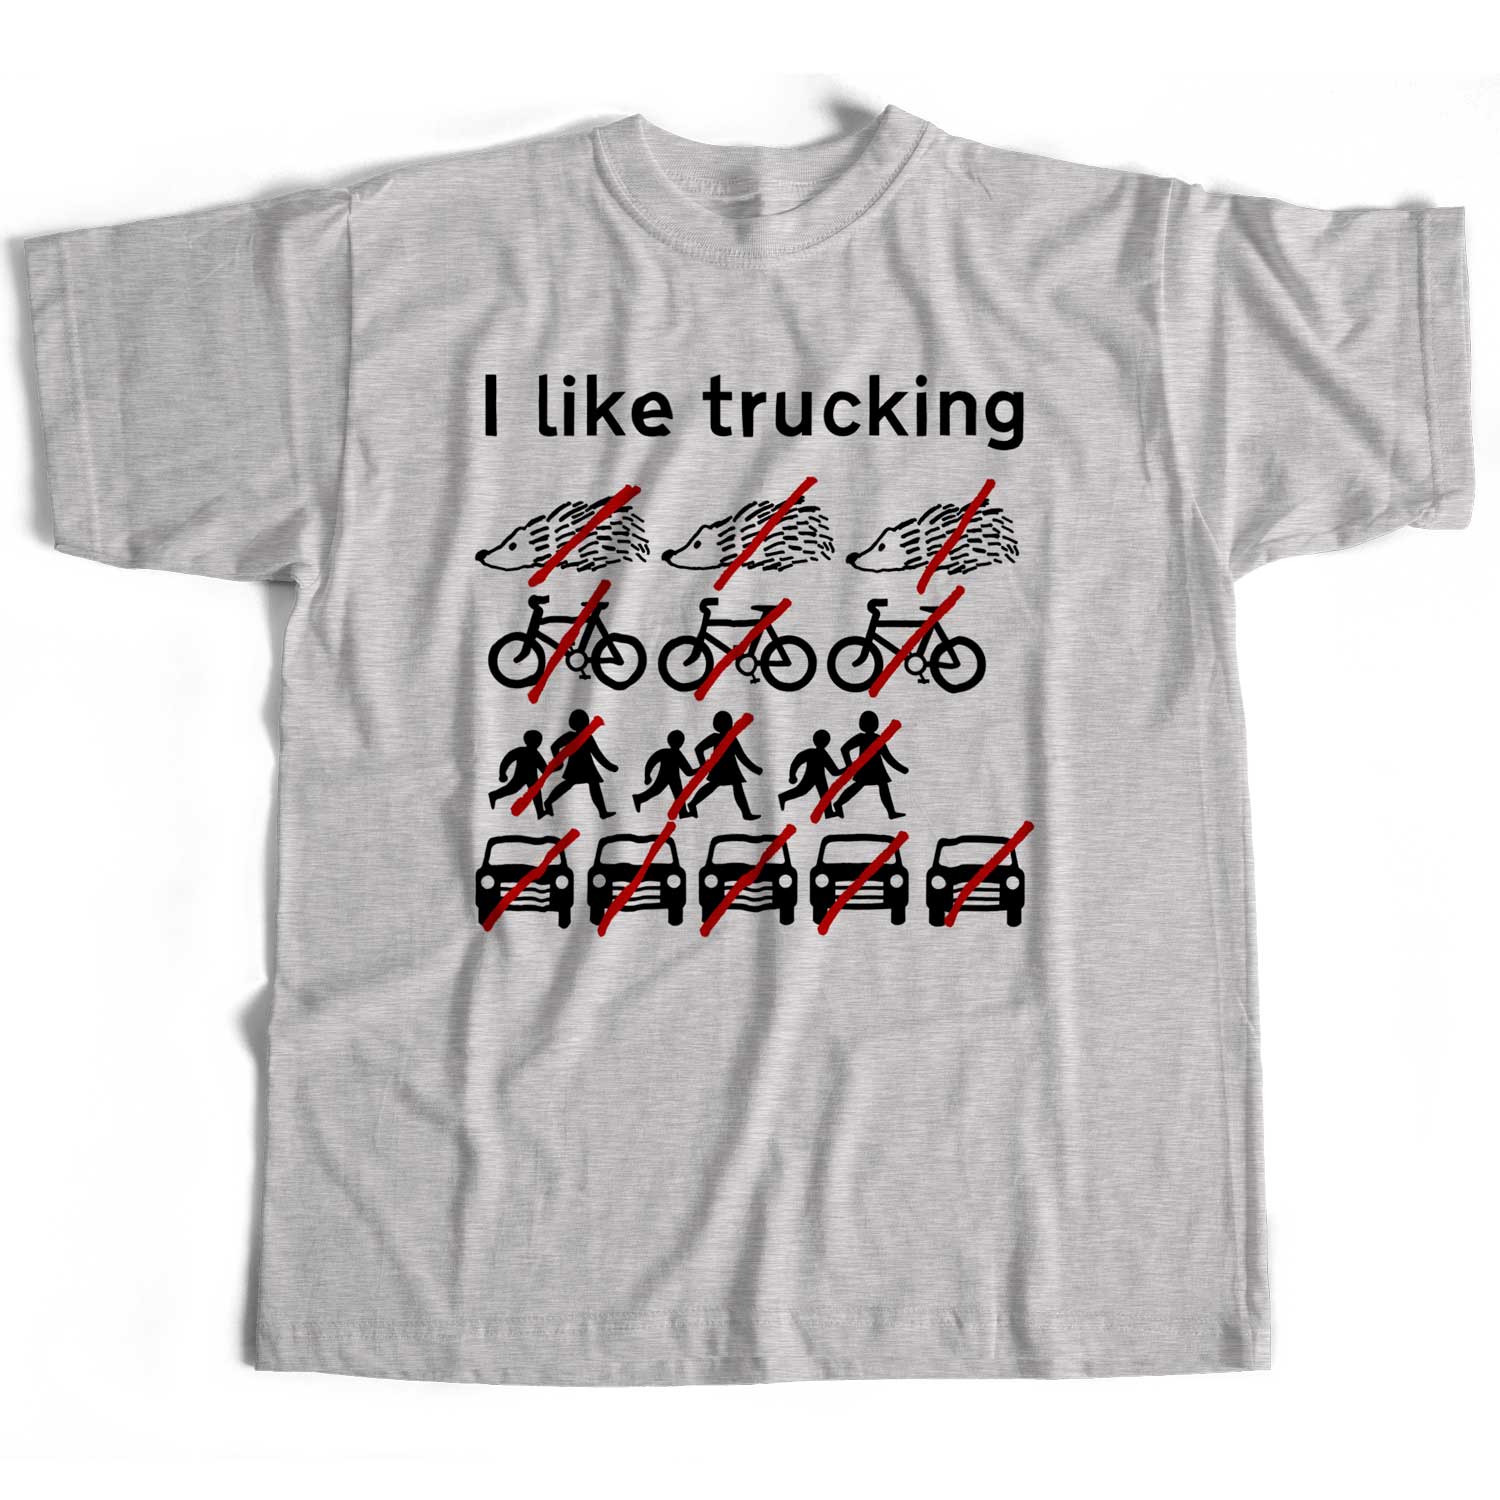 Inspired by Not The Nine O'Clock News T shirt - I Like Trucking Hedghogs